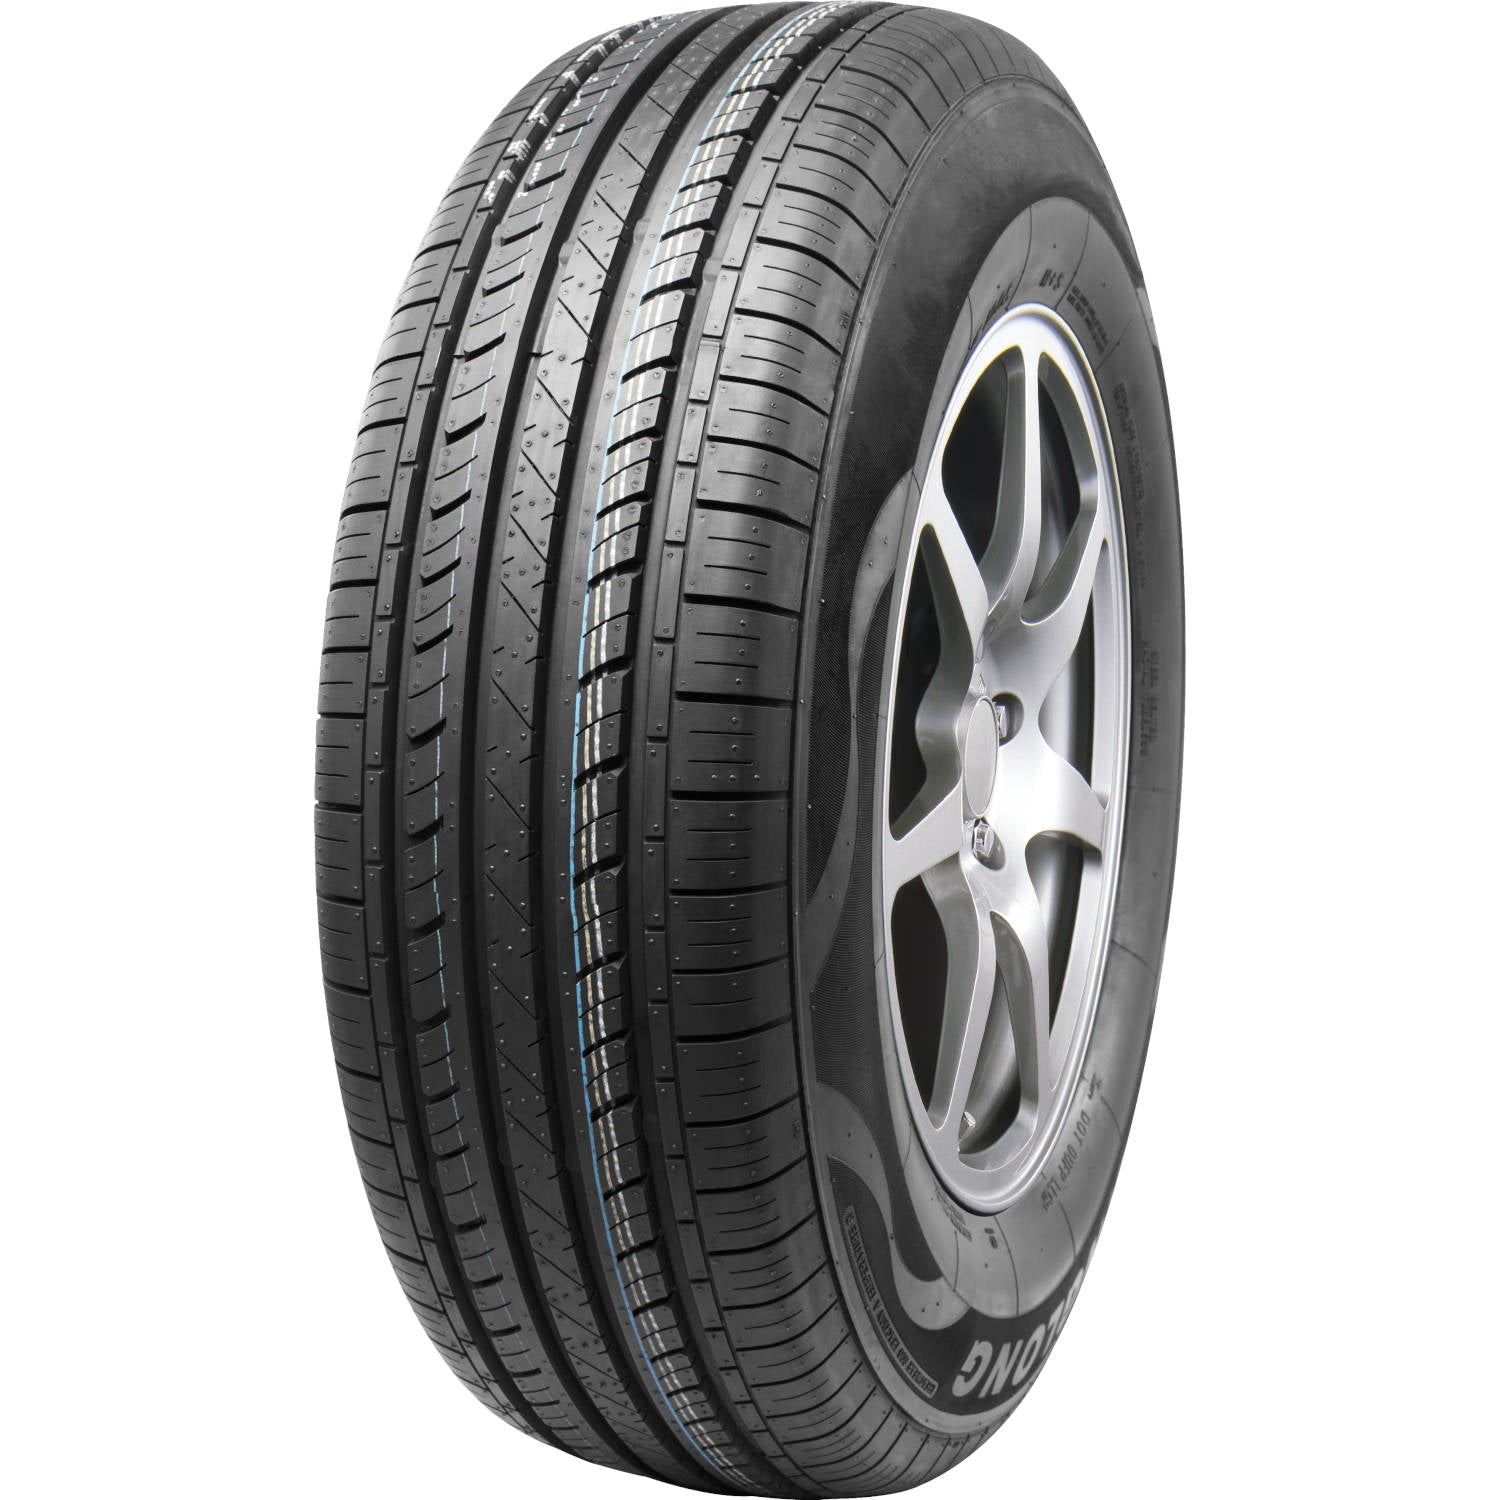 ROAD ONE CAVALRY A/S 195/60R15 (24.2X7.7R 15) Tires